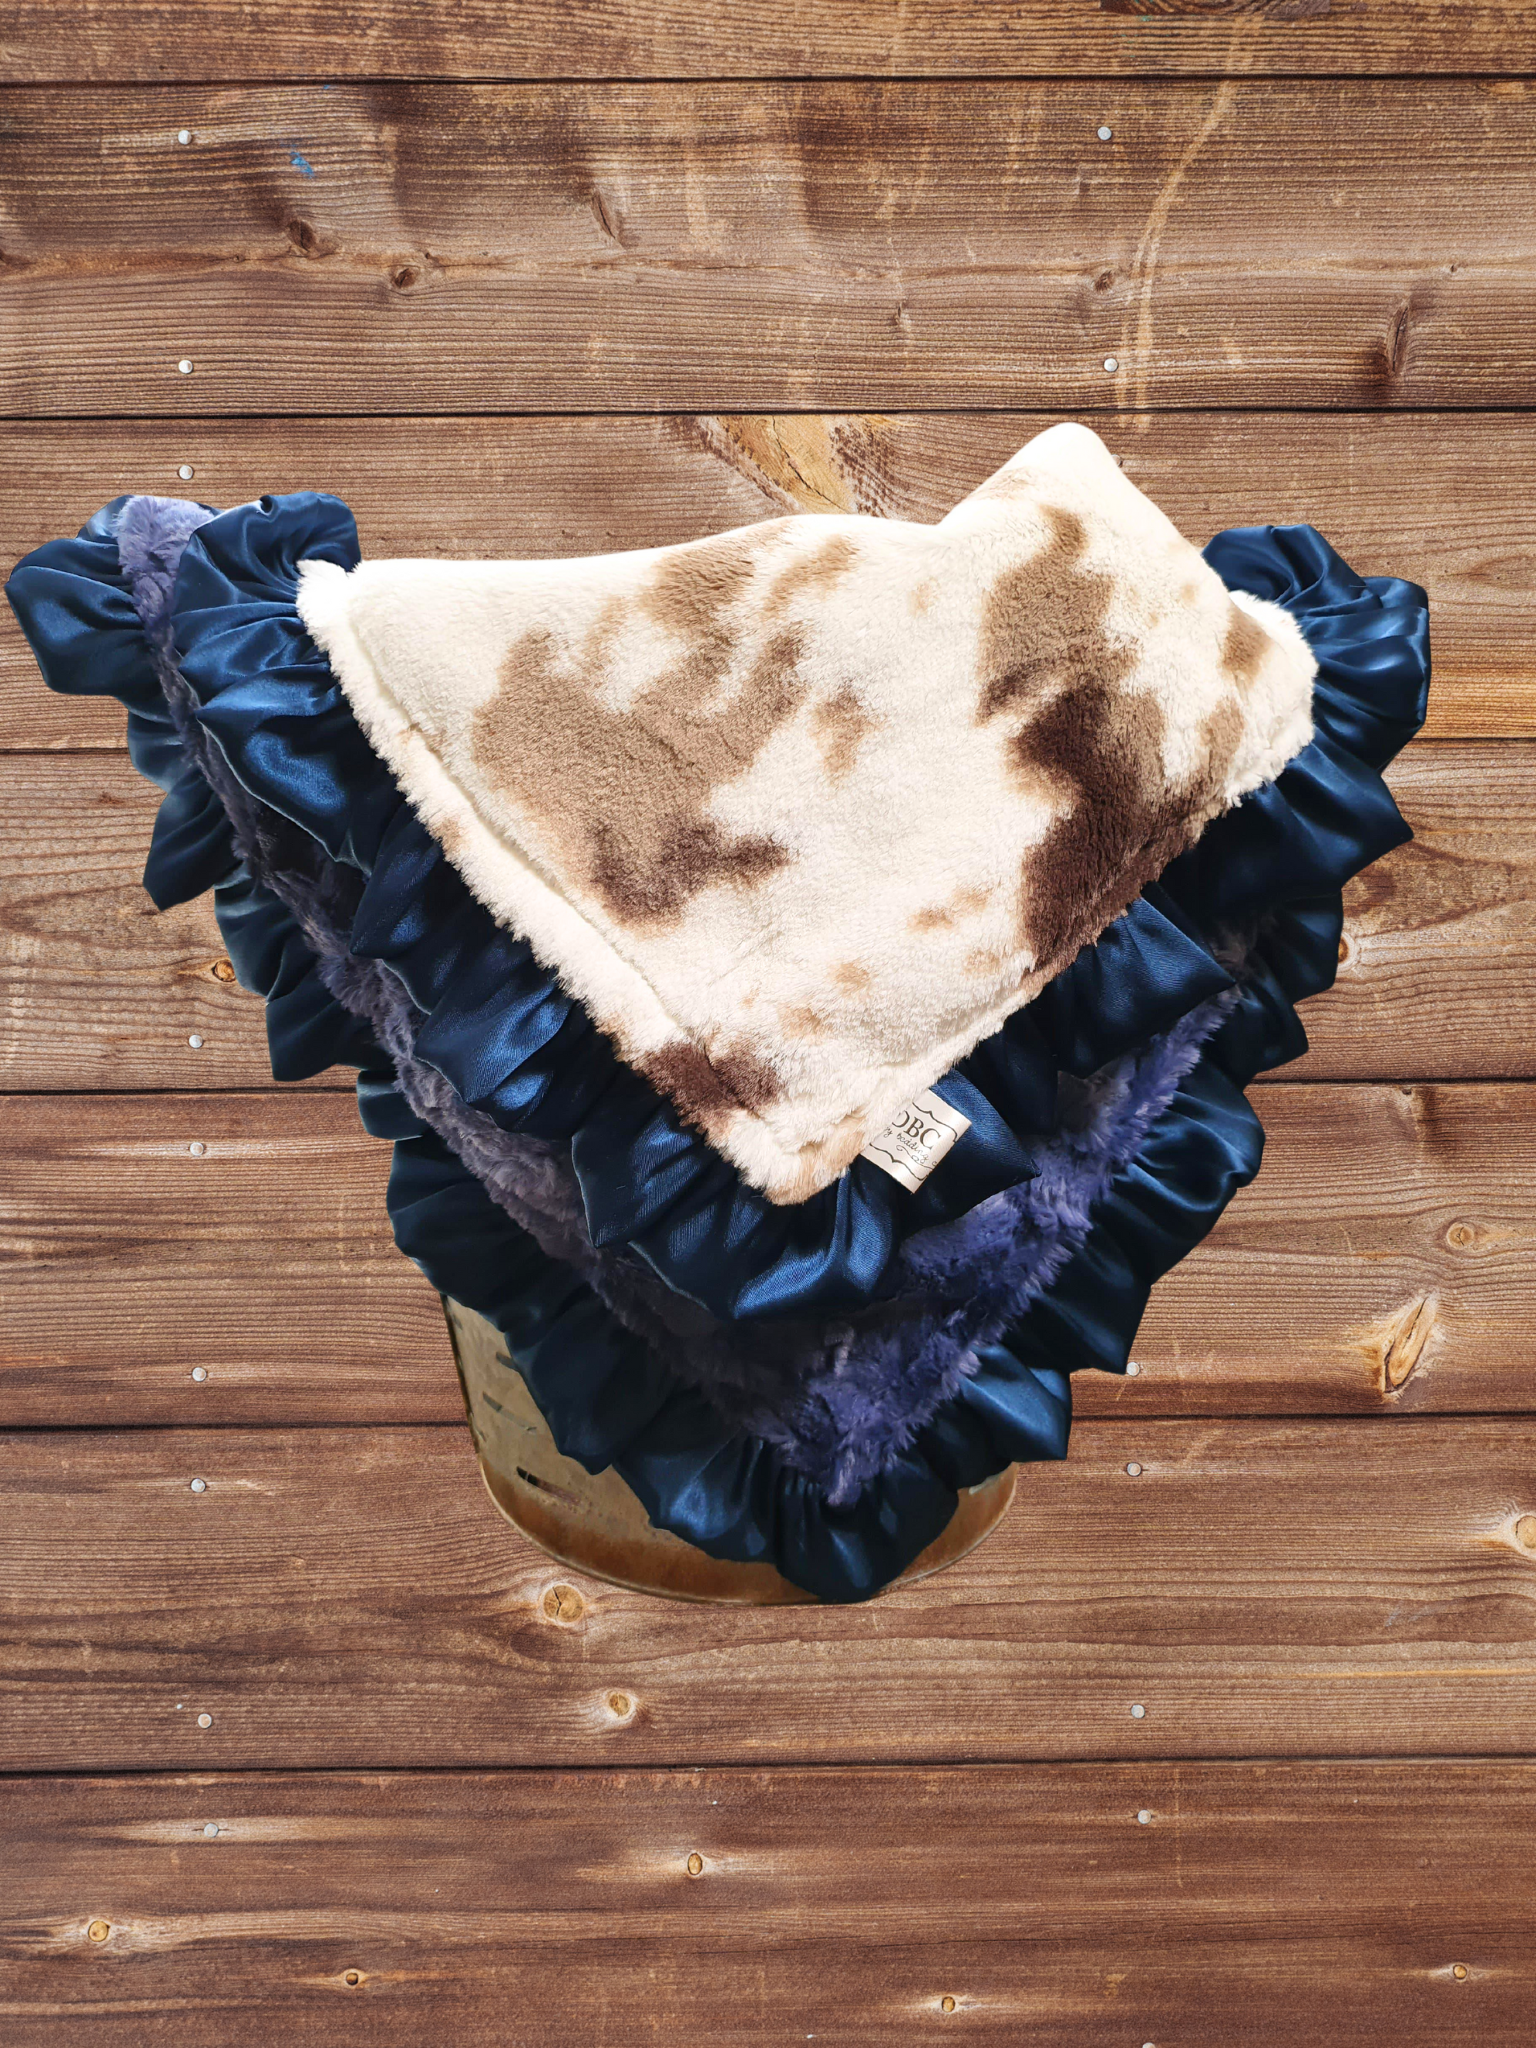 Ruffle Baby Lovey - Brown Sugar Cow with Navy Satin Ruffle Western Lovey - DBC Baby Bedding Co 